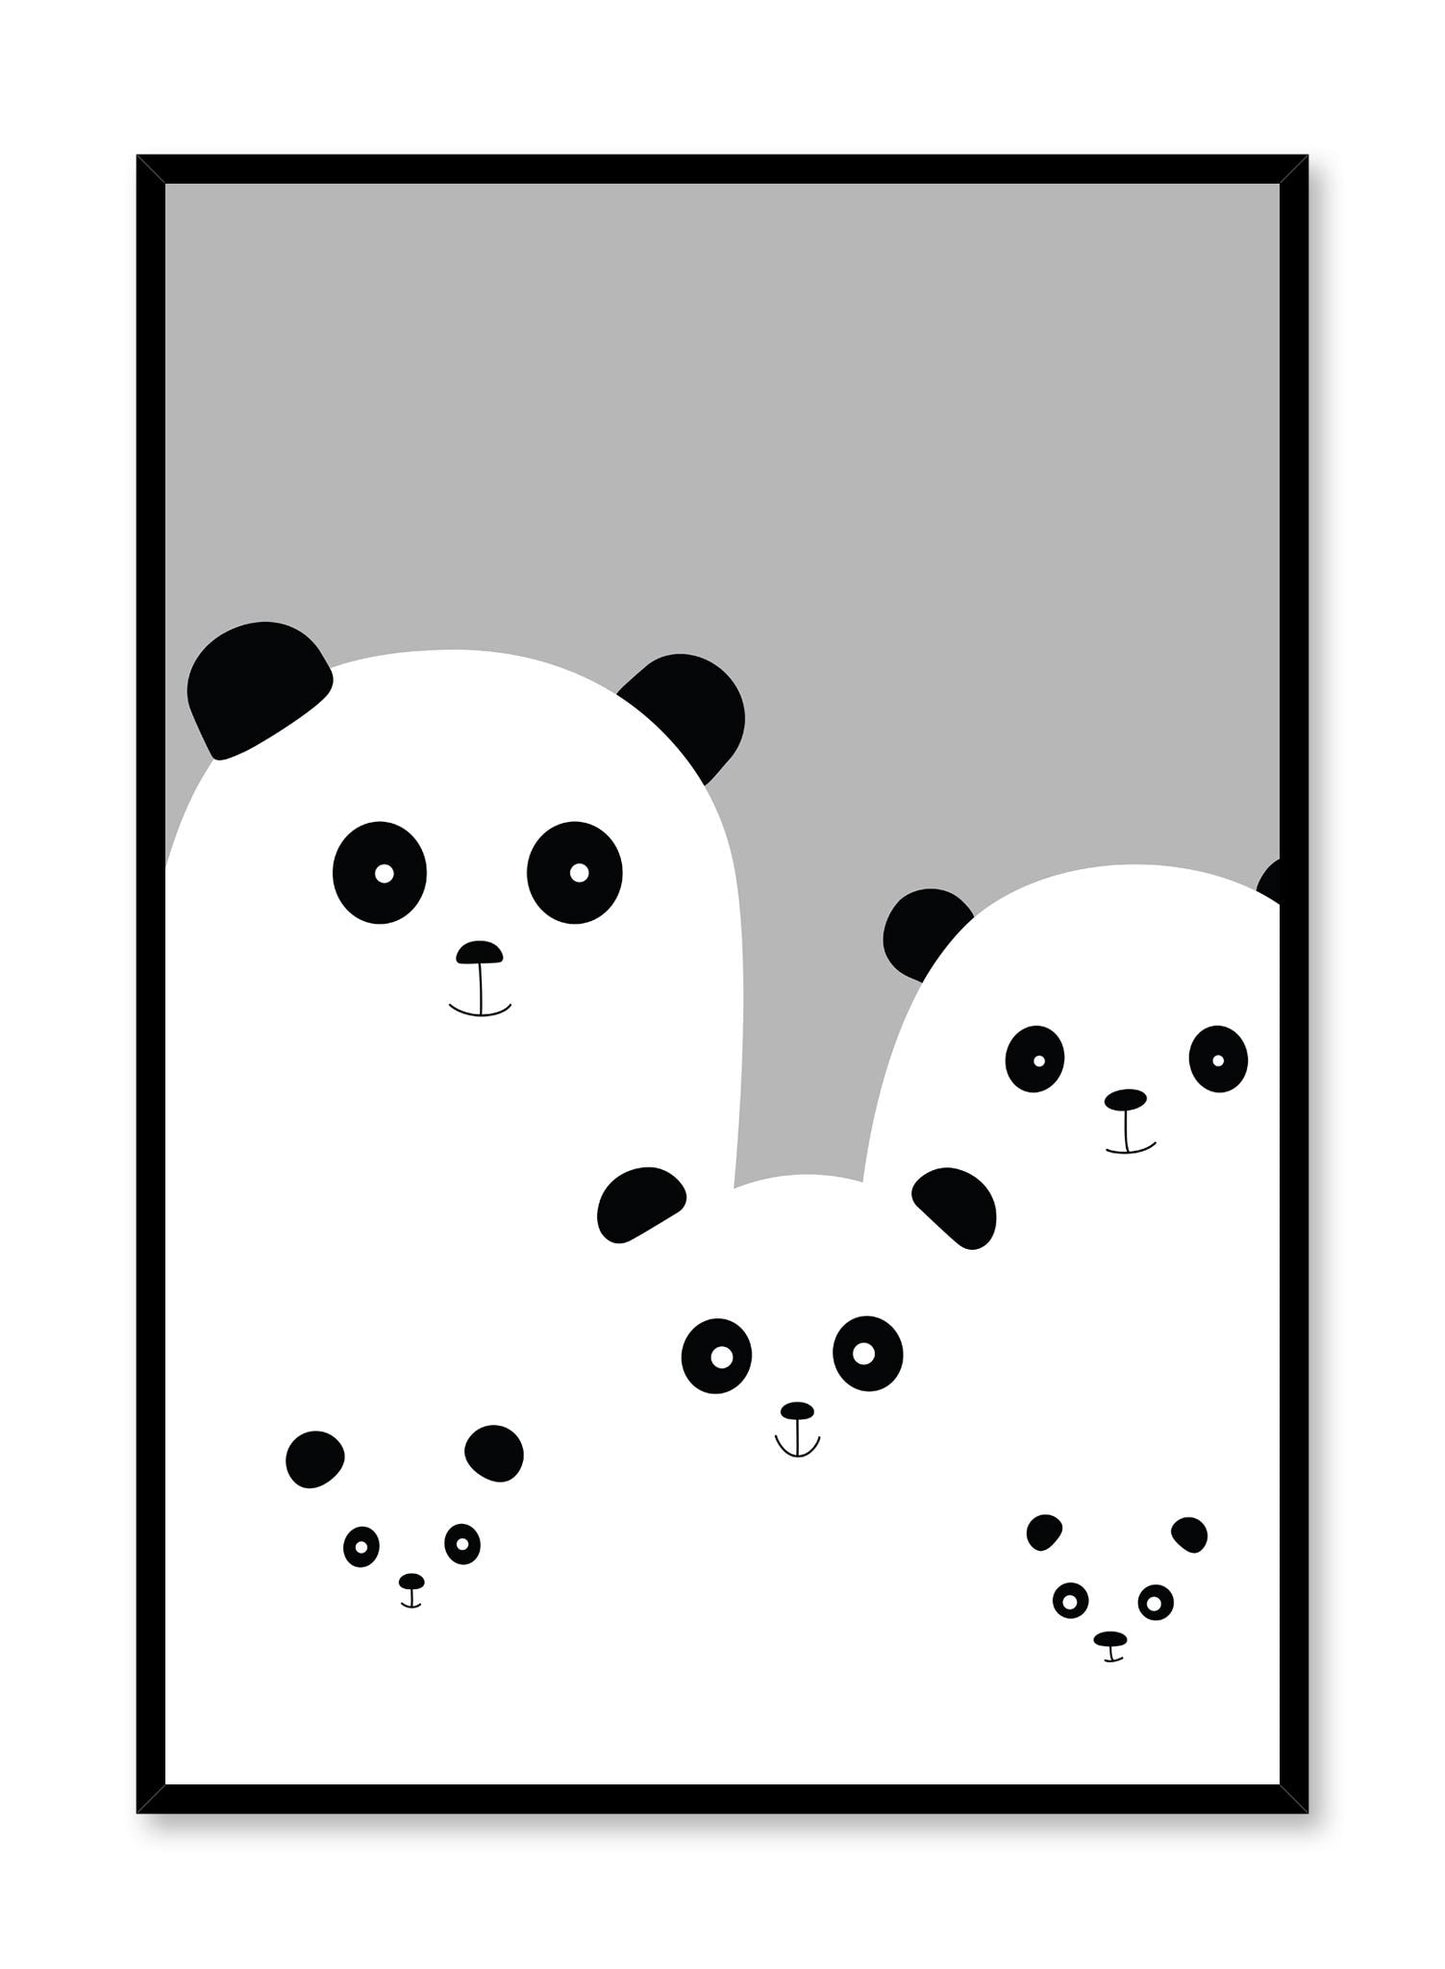 Modern minimalist poster by Opposite Wall with kids illustration of pandas in black & white